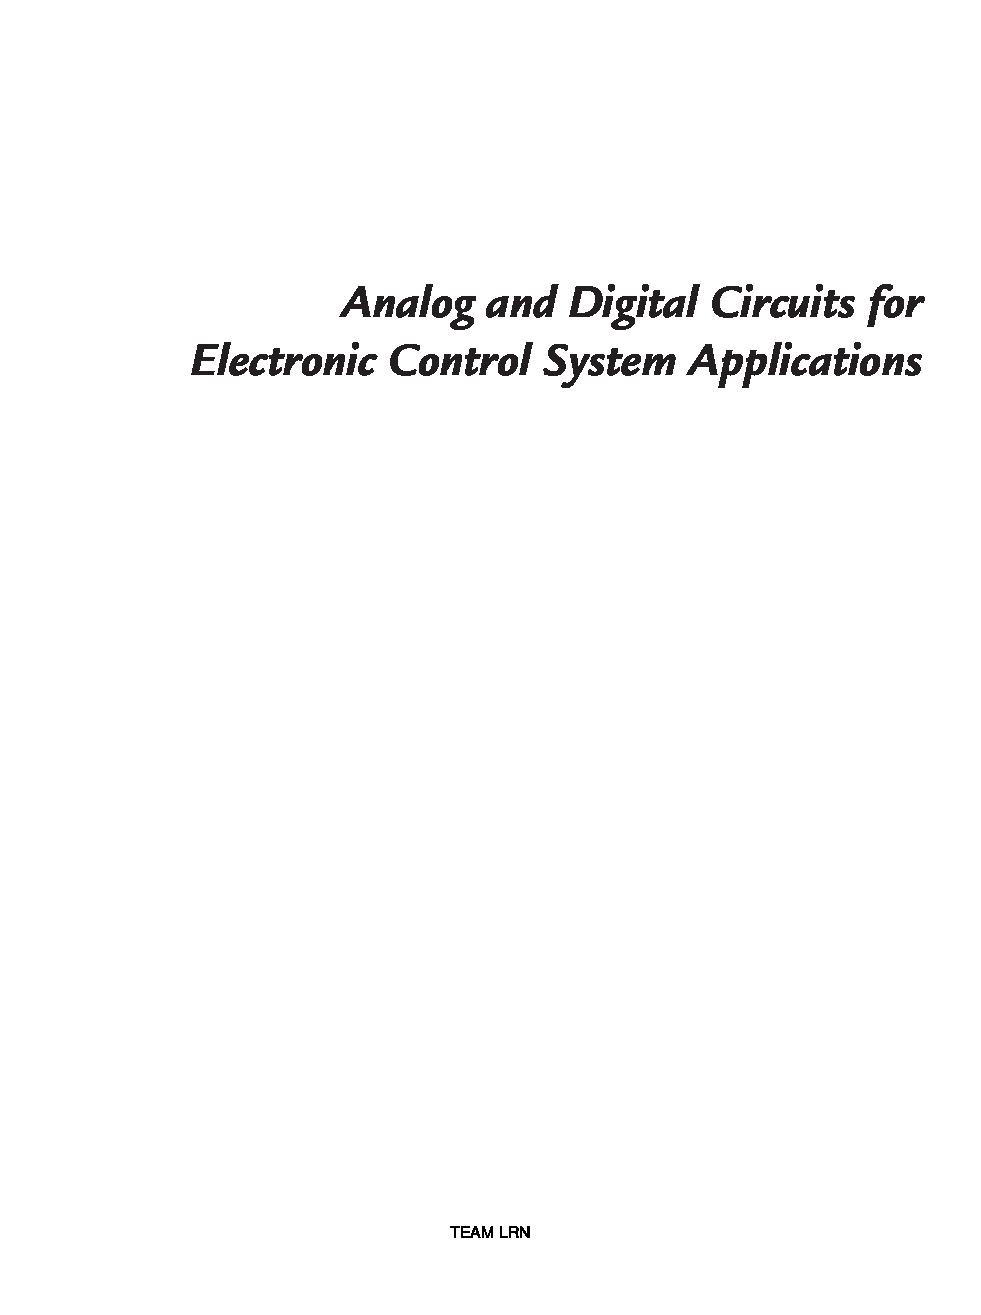 Jerry Luecke – Analog and Digital Circuits for Electronic Control System Applications_ Using the TI MSP430 Microcontroller-Newnes (2004)